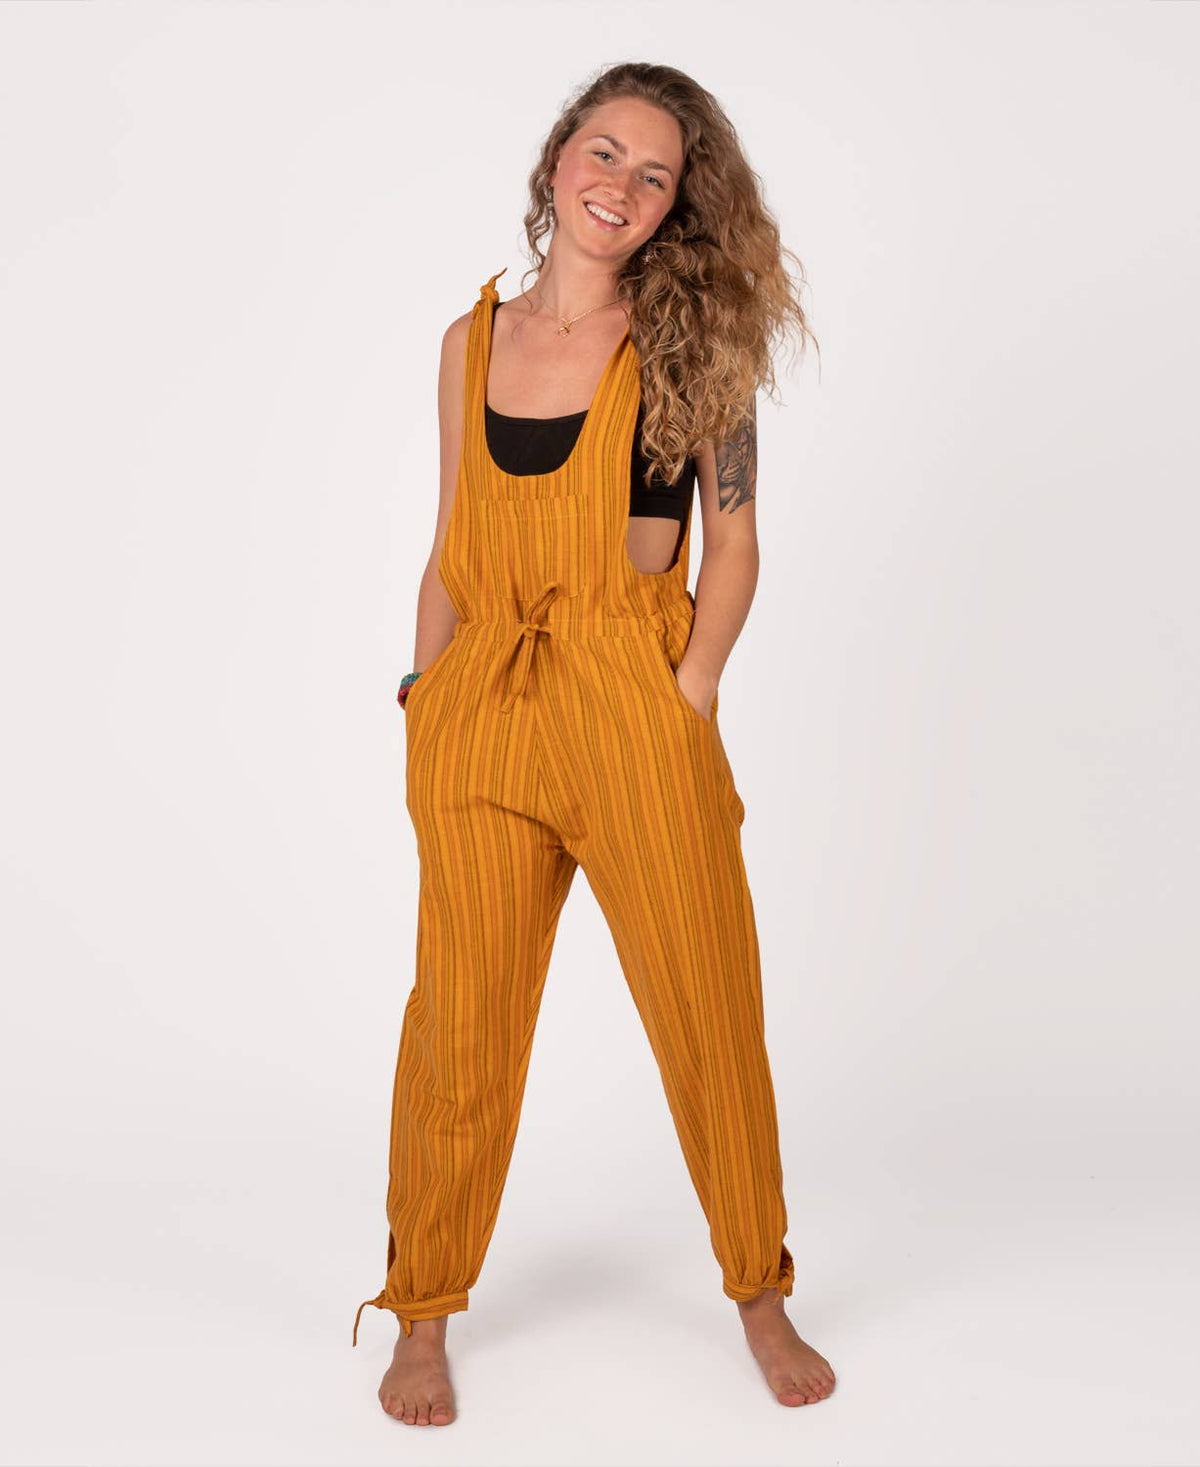 Terrapin Moon Apparel - Ladies Clothing Shop - Striped Hippie Overalls